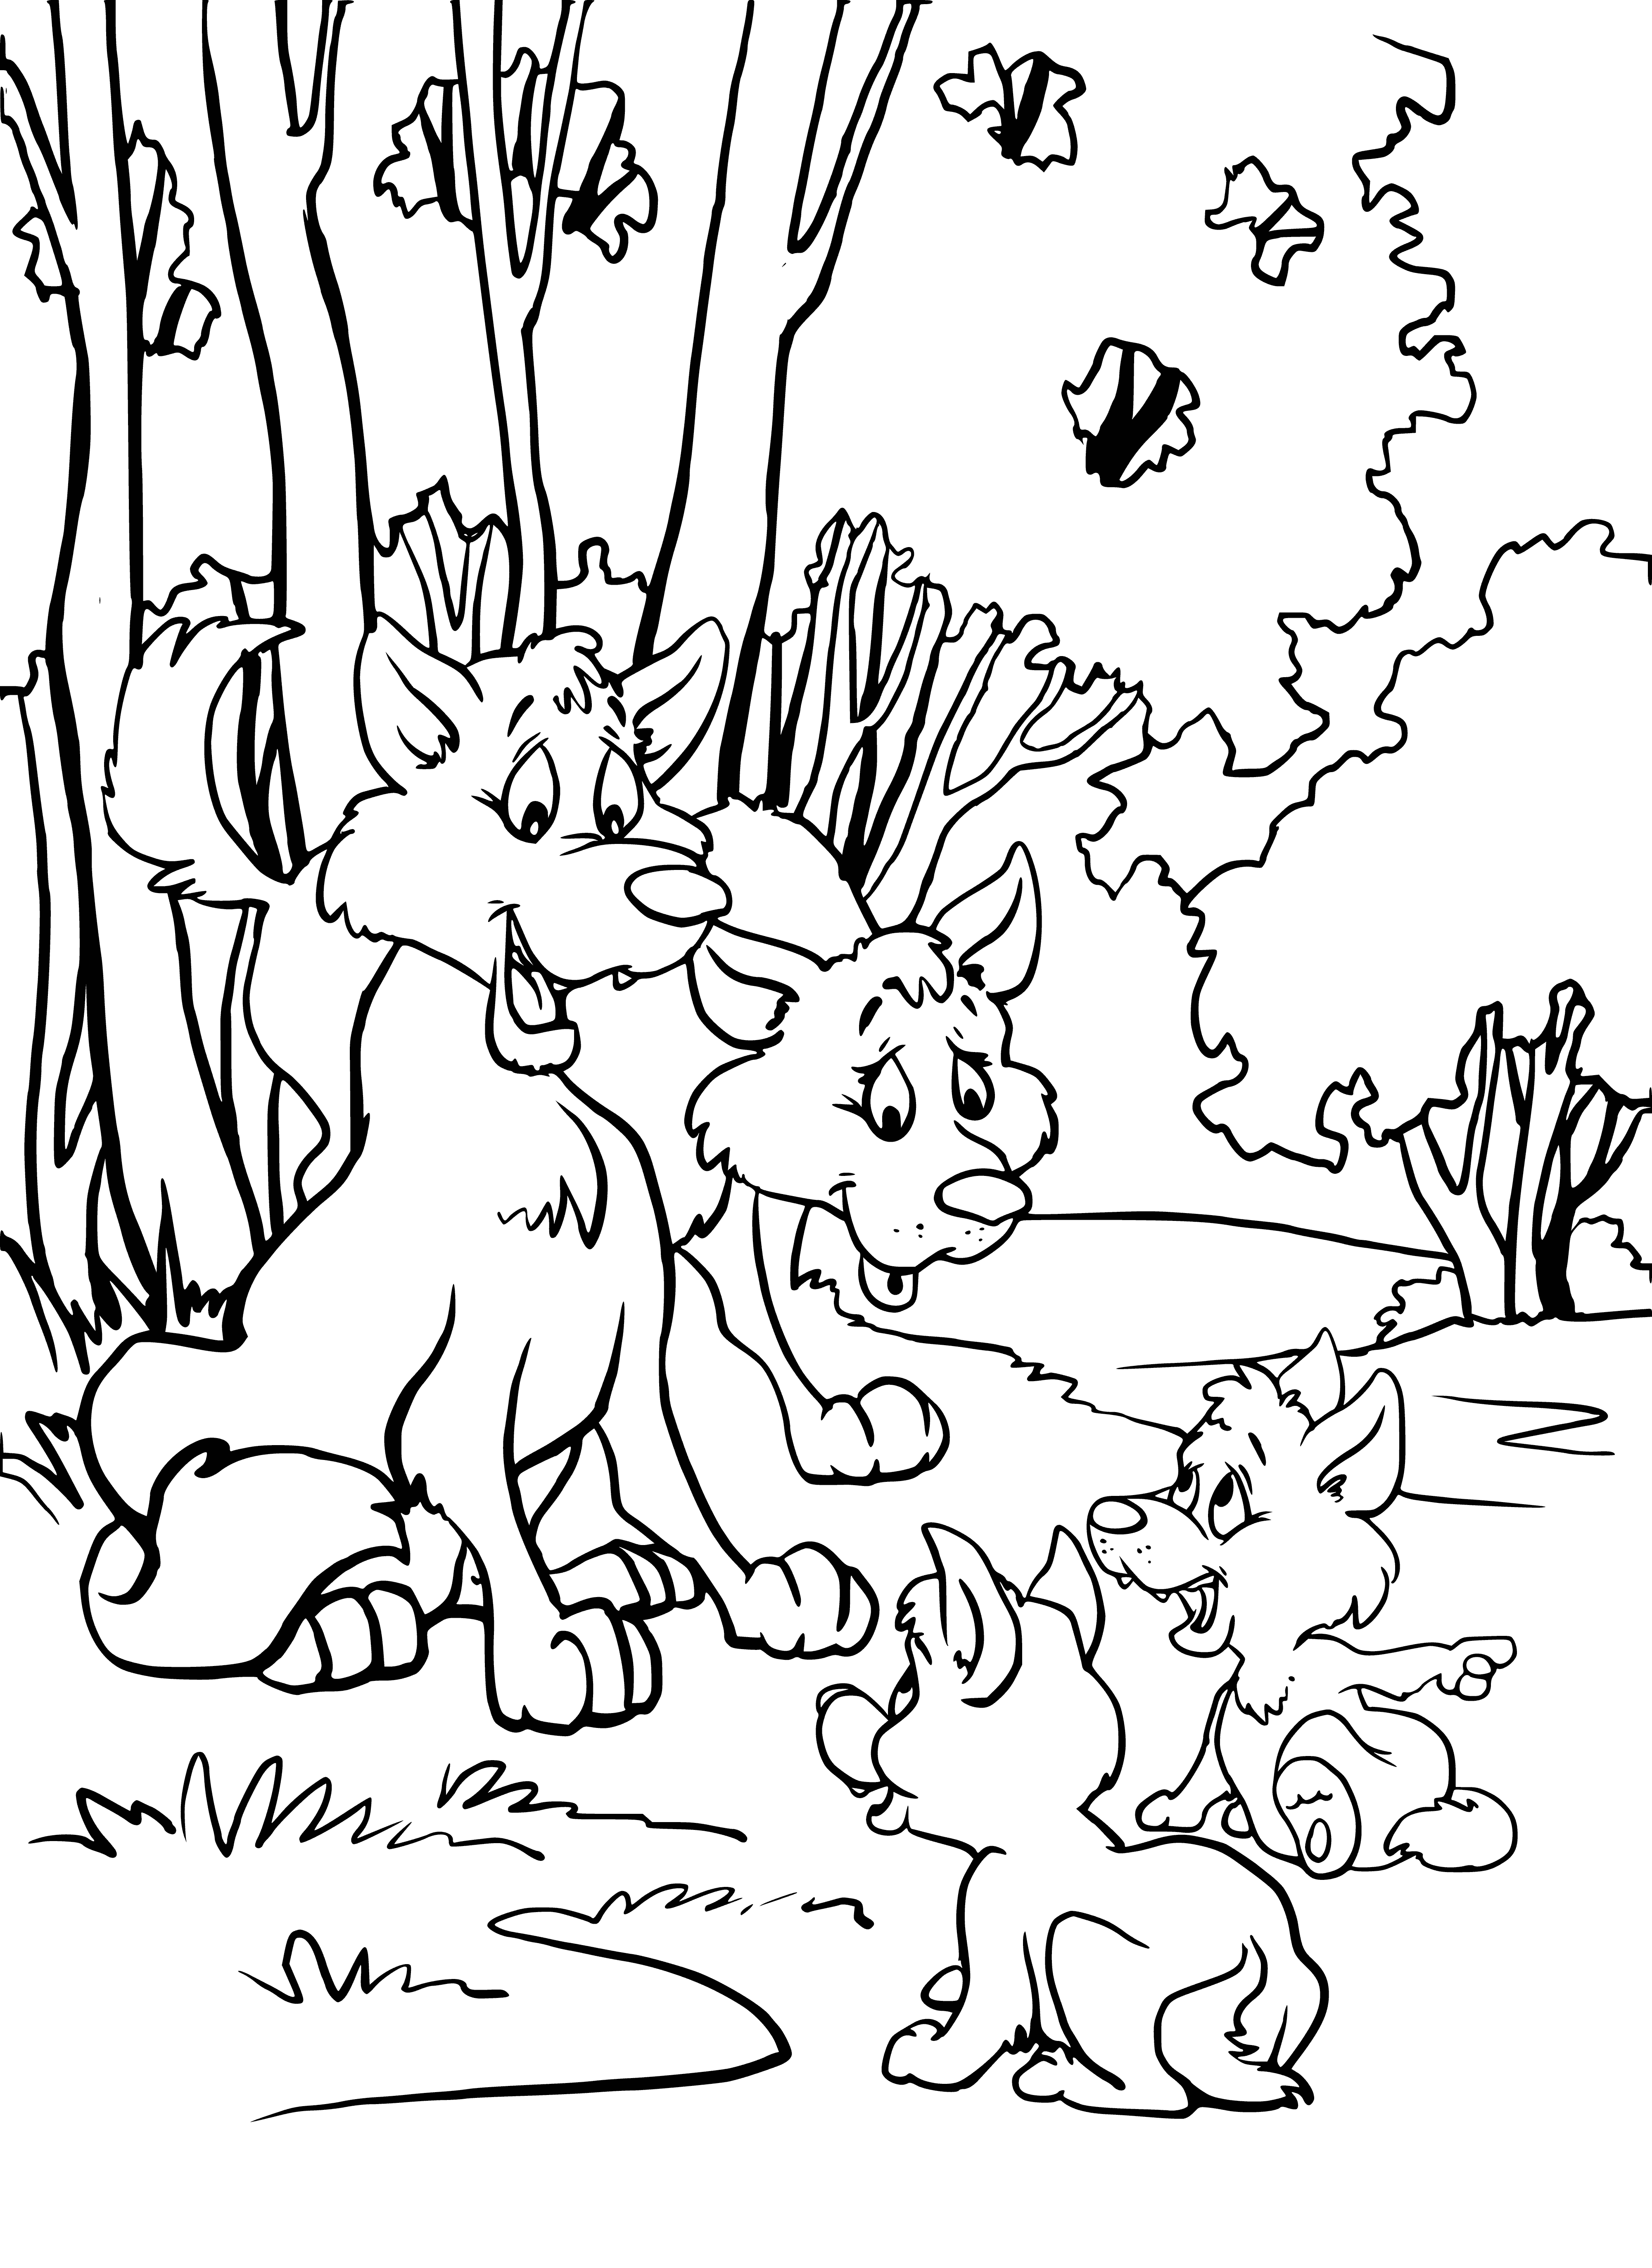 Wolves and cubs coloring page